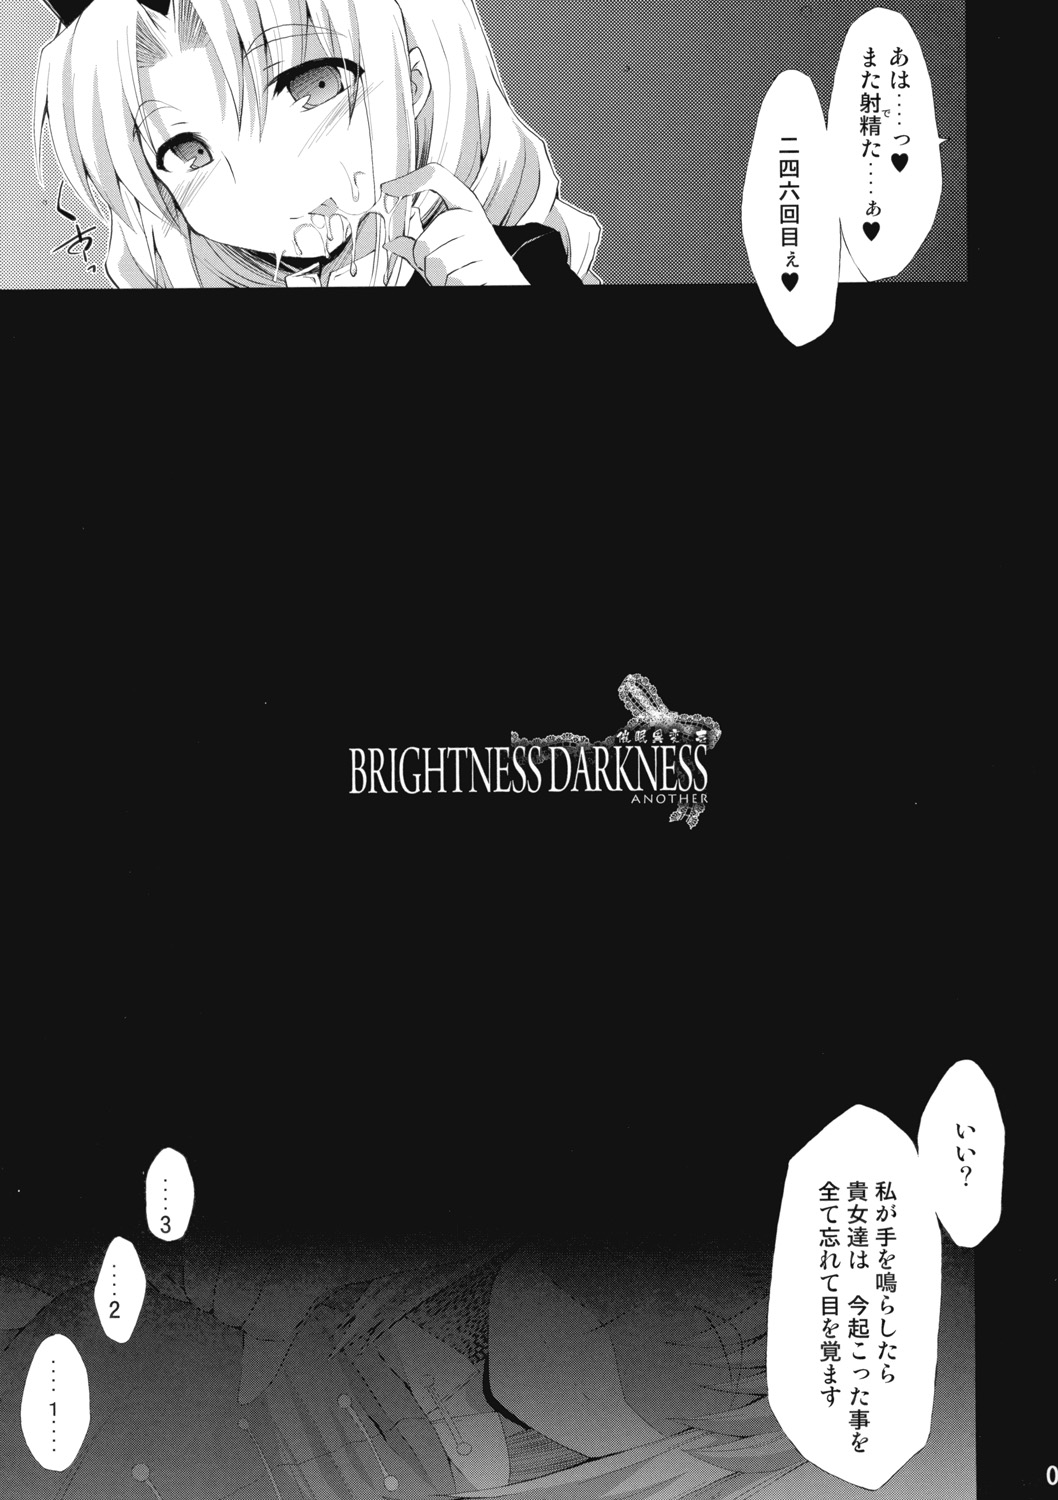 (C76) [IncluDe (Foolest)] Saimin Ihen Ichi - BRIGHTNESS DARKNESS ANOTHER (Touhou Project) page 6 full